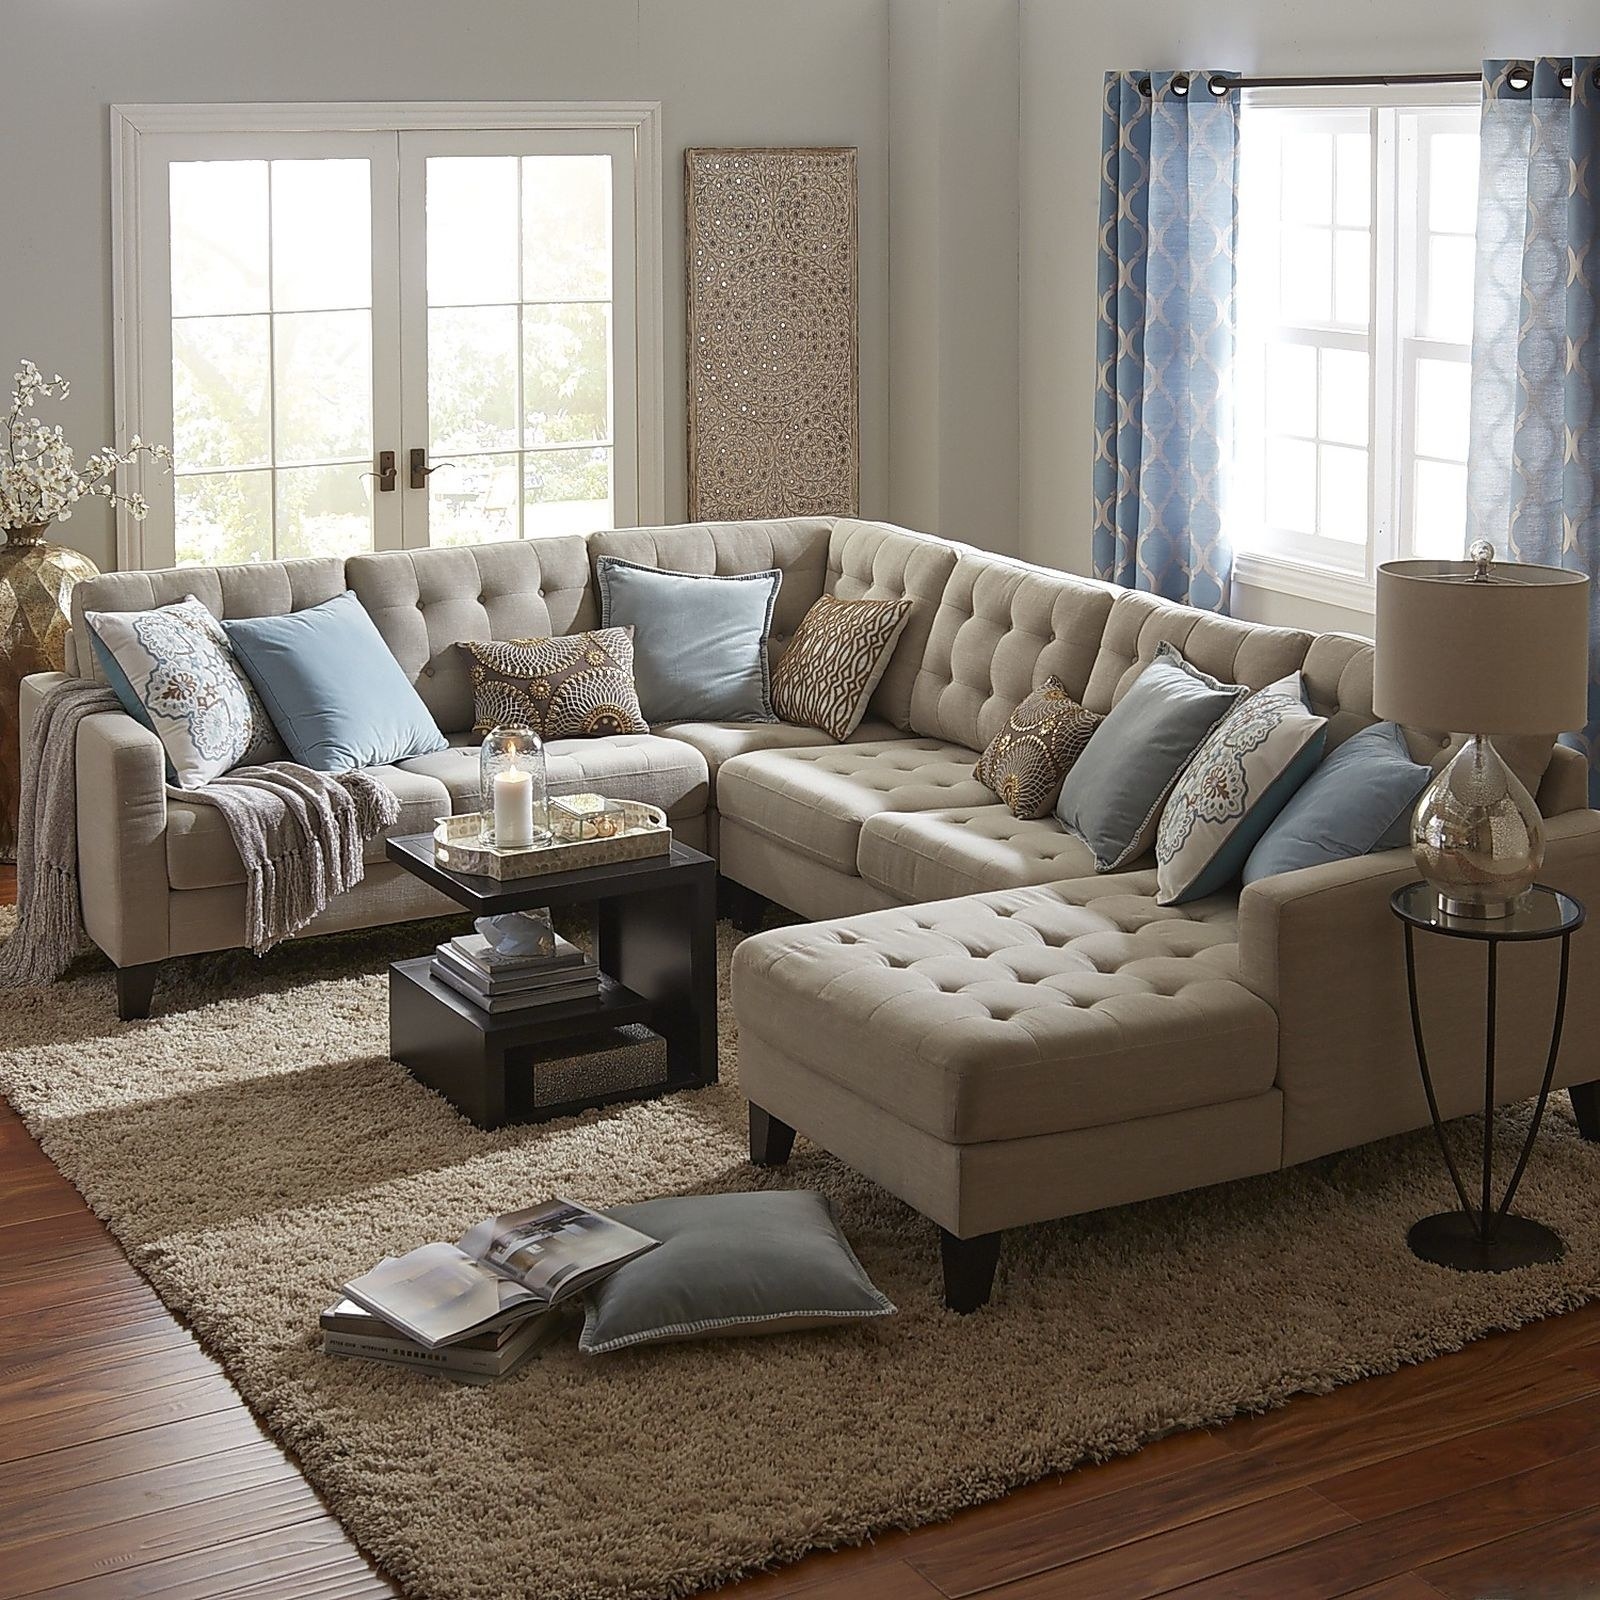 Buy Sectional Sleeper Sofas For Sale Online